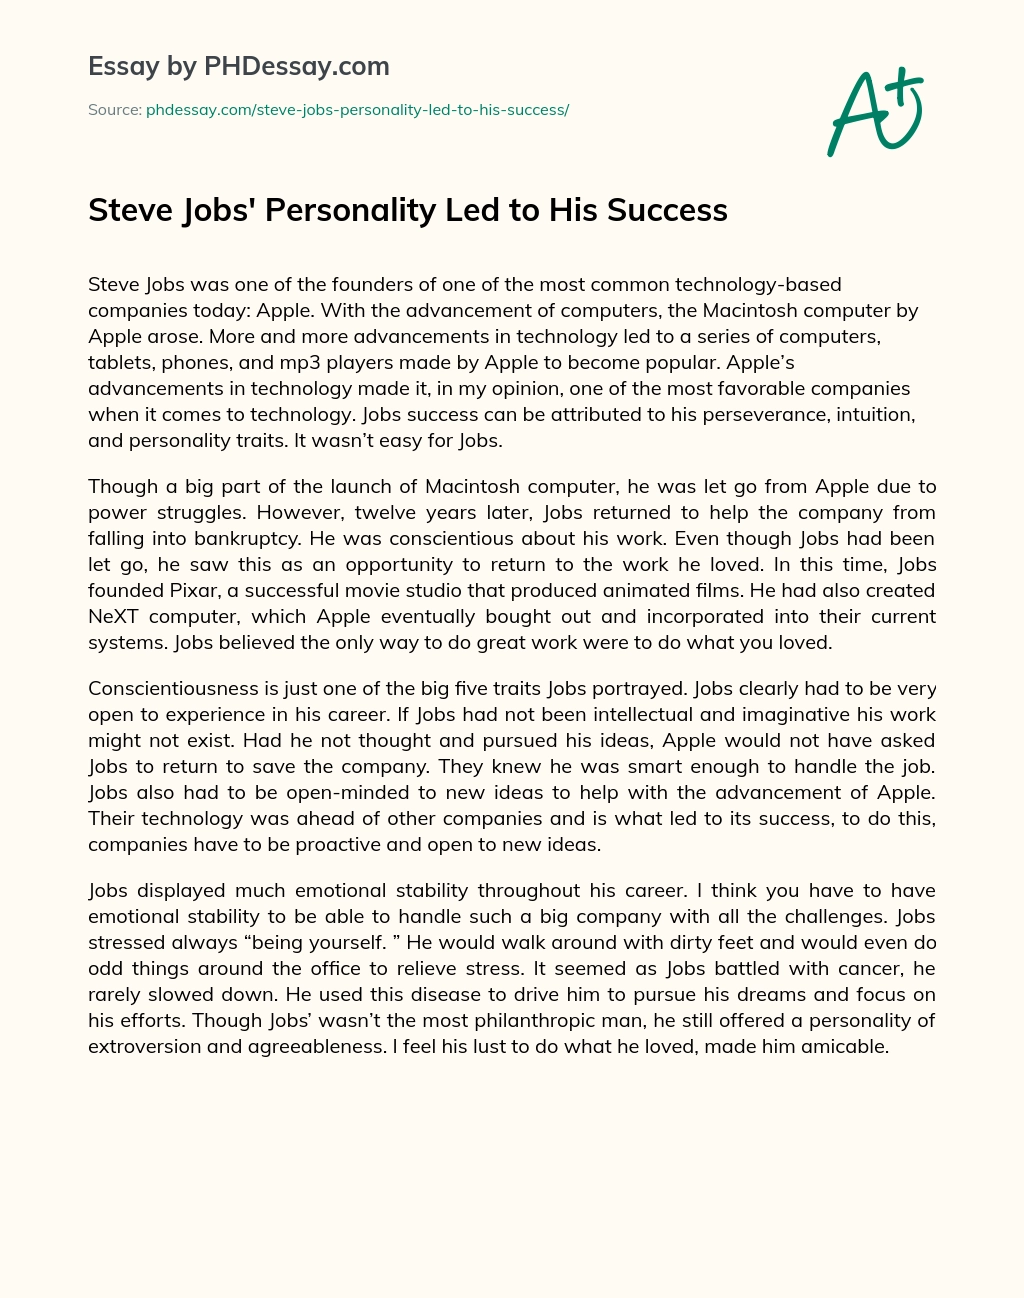 Steve Jobs’ Personality Led to His Success essay